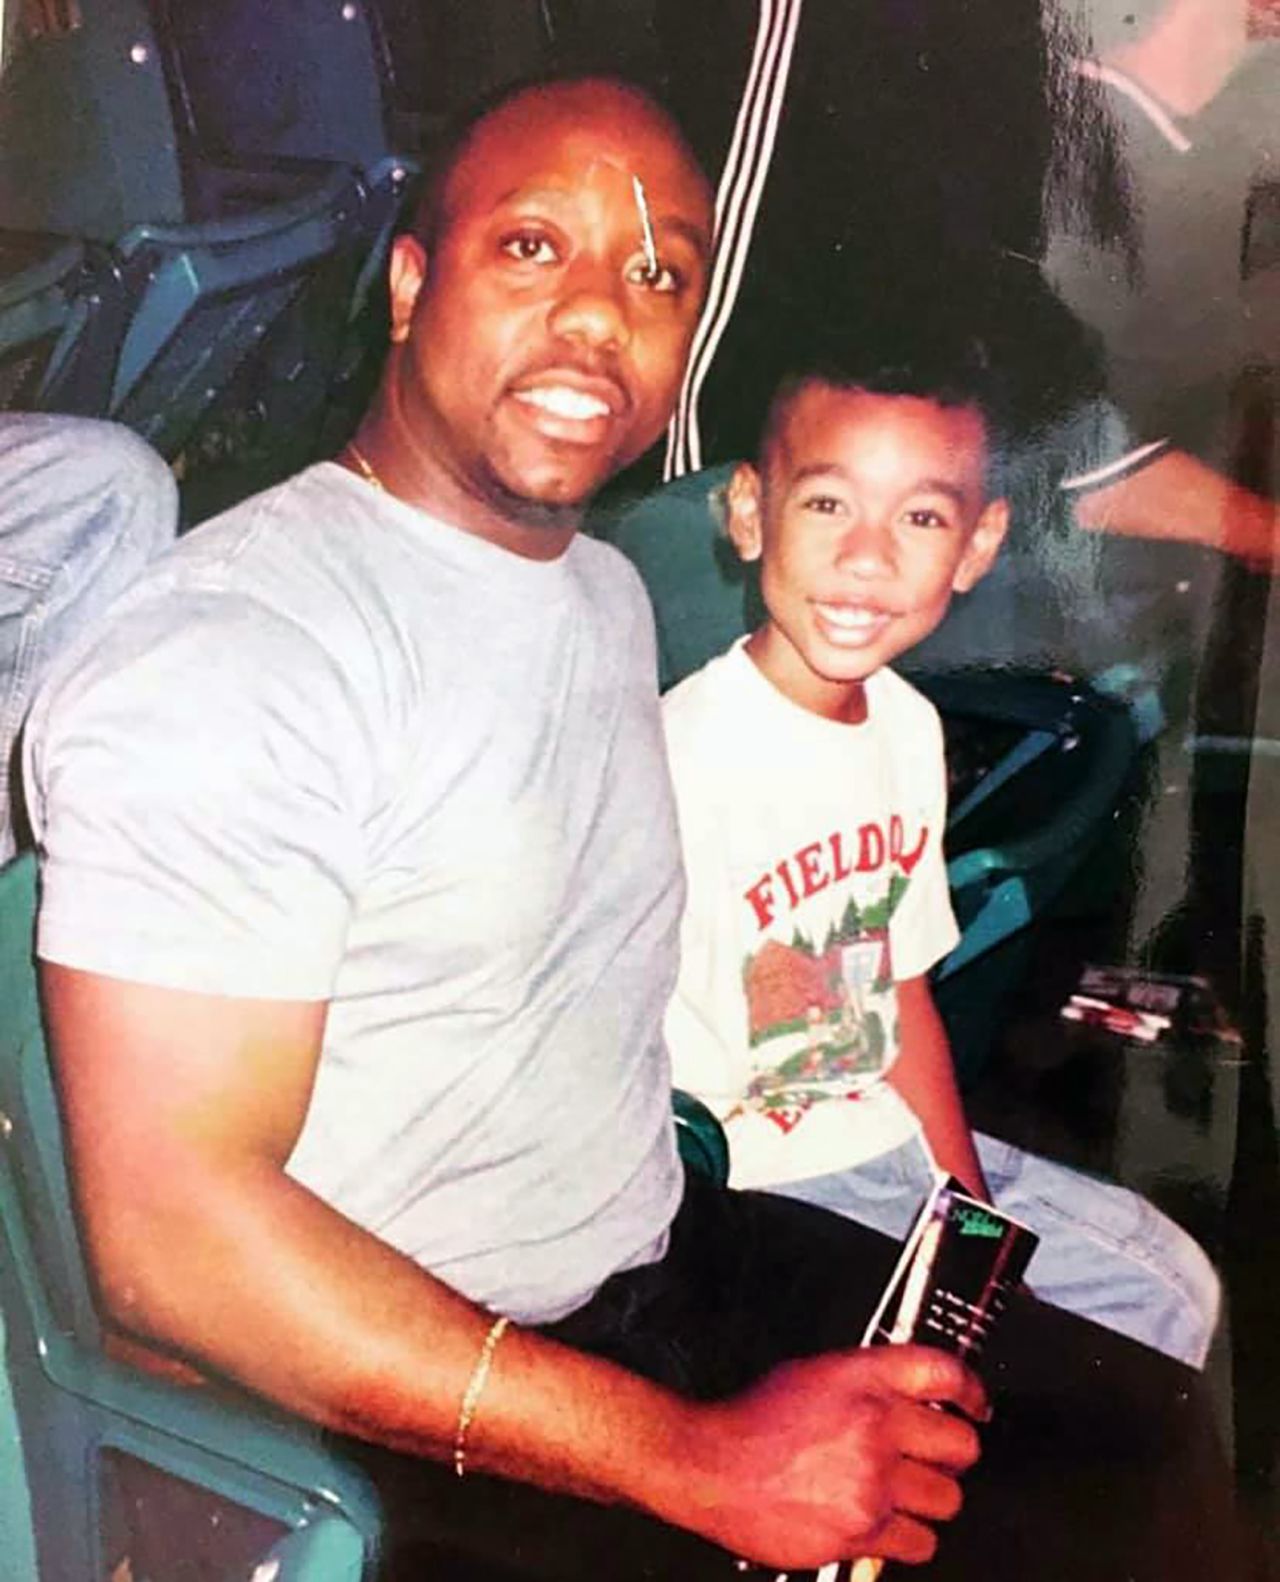 Scott poses for a photo with his nephew Ben at an NBA playoff game in 1998. At the time, he was a member of the Charleston County Council. A couple of years earlier, he ran for a Senate seat in the South Carolina General Assembly.